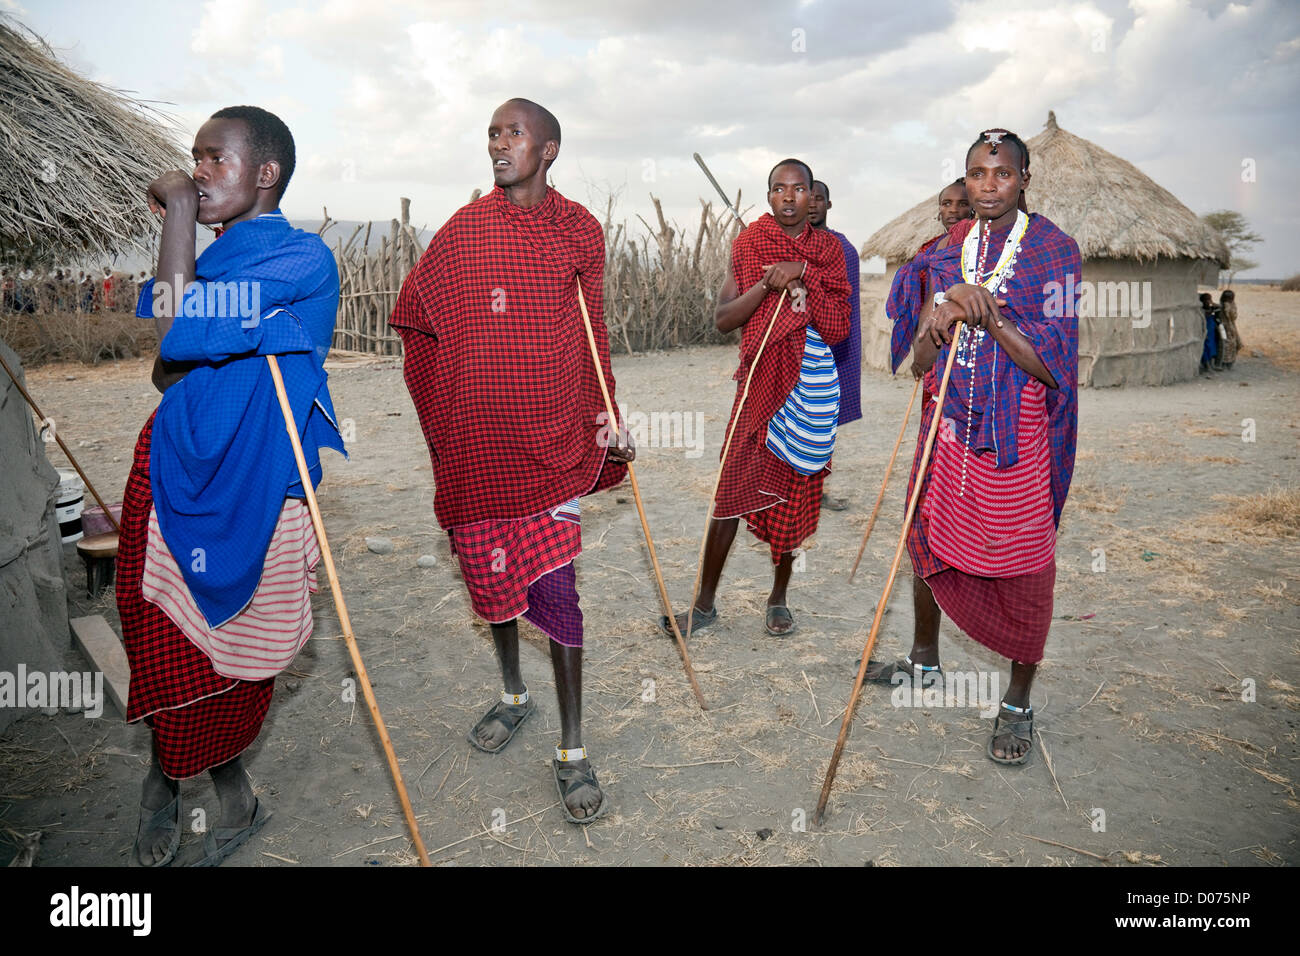 Group of five Maasai Worriers at Tanzania;East Africa;Africa;Authentic Cultural Village in Olpopongi;Maasai Men Worrier Stock Photo